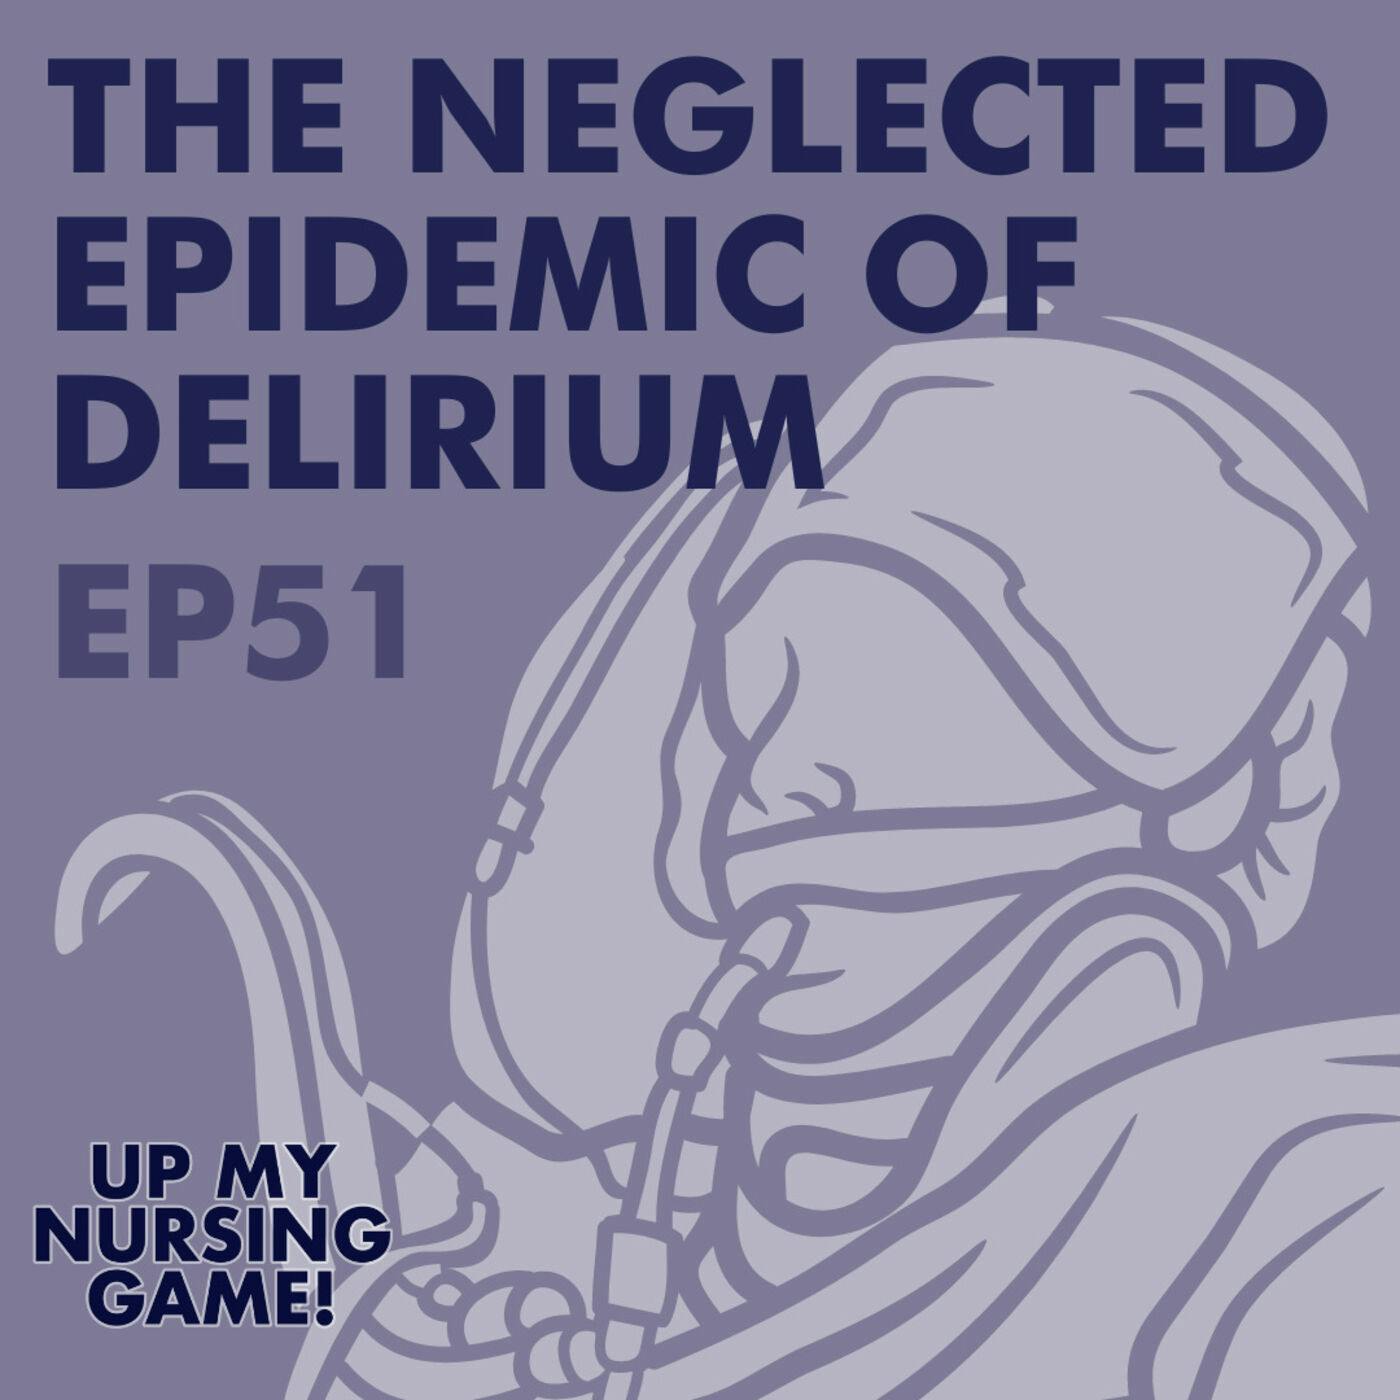 Breaking the Silence: The Neglected Epidemic of Delirium